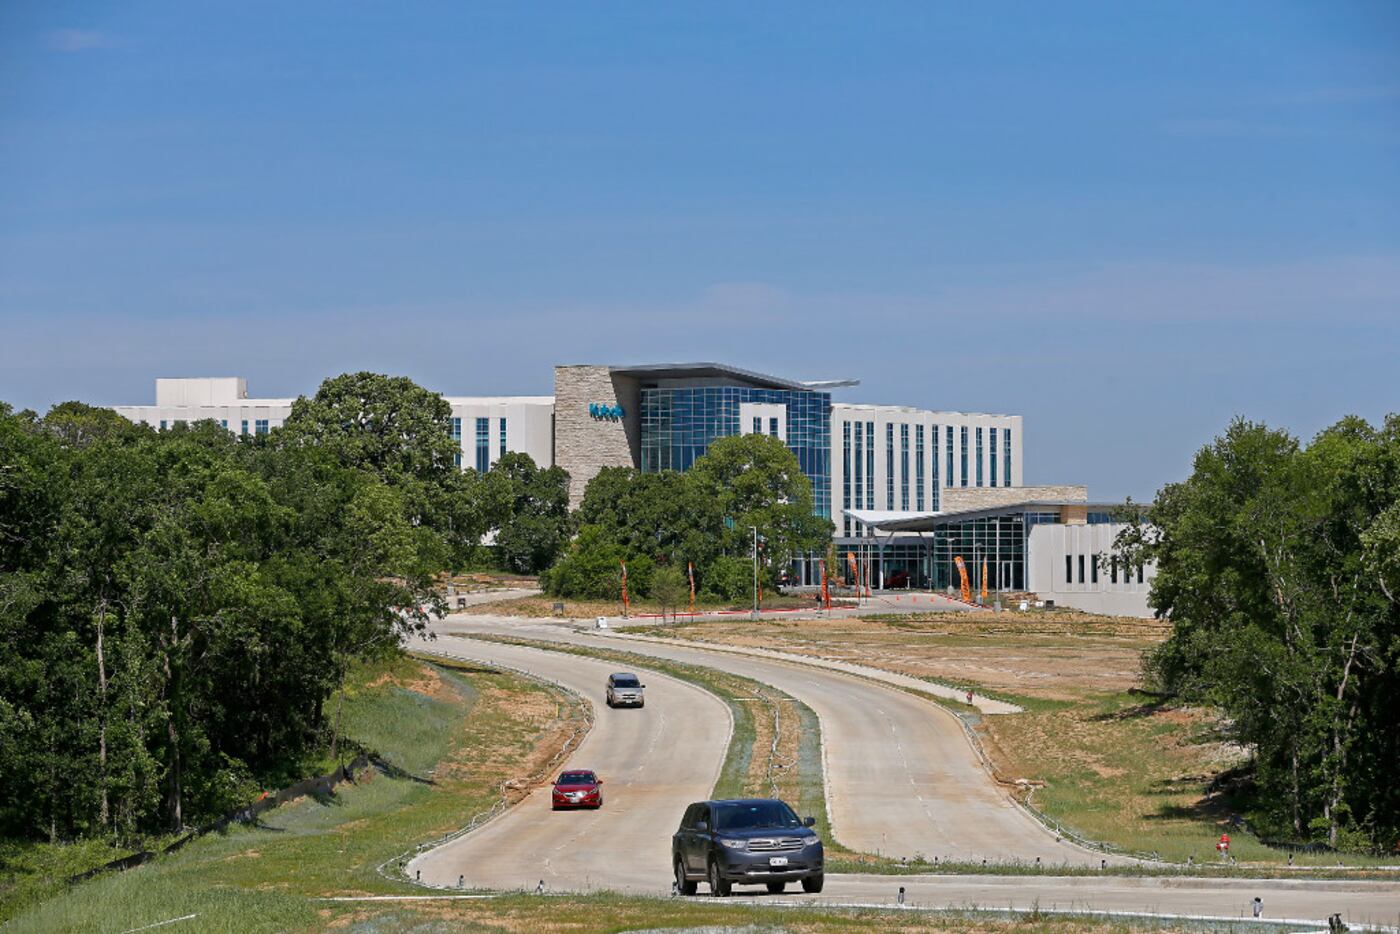 The Kubota Tractor Corp. headquarters, shot from Highway 121 in Grapevine. The company has...